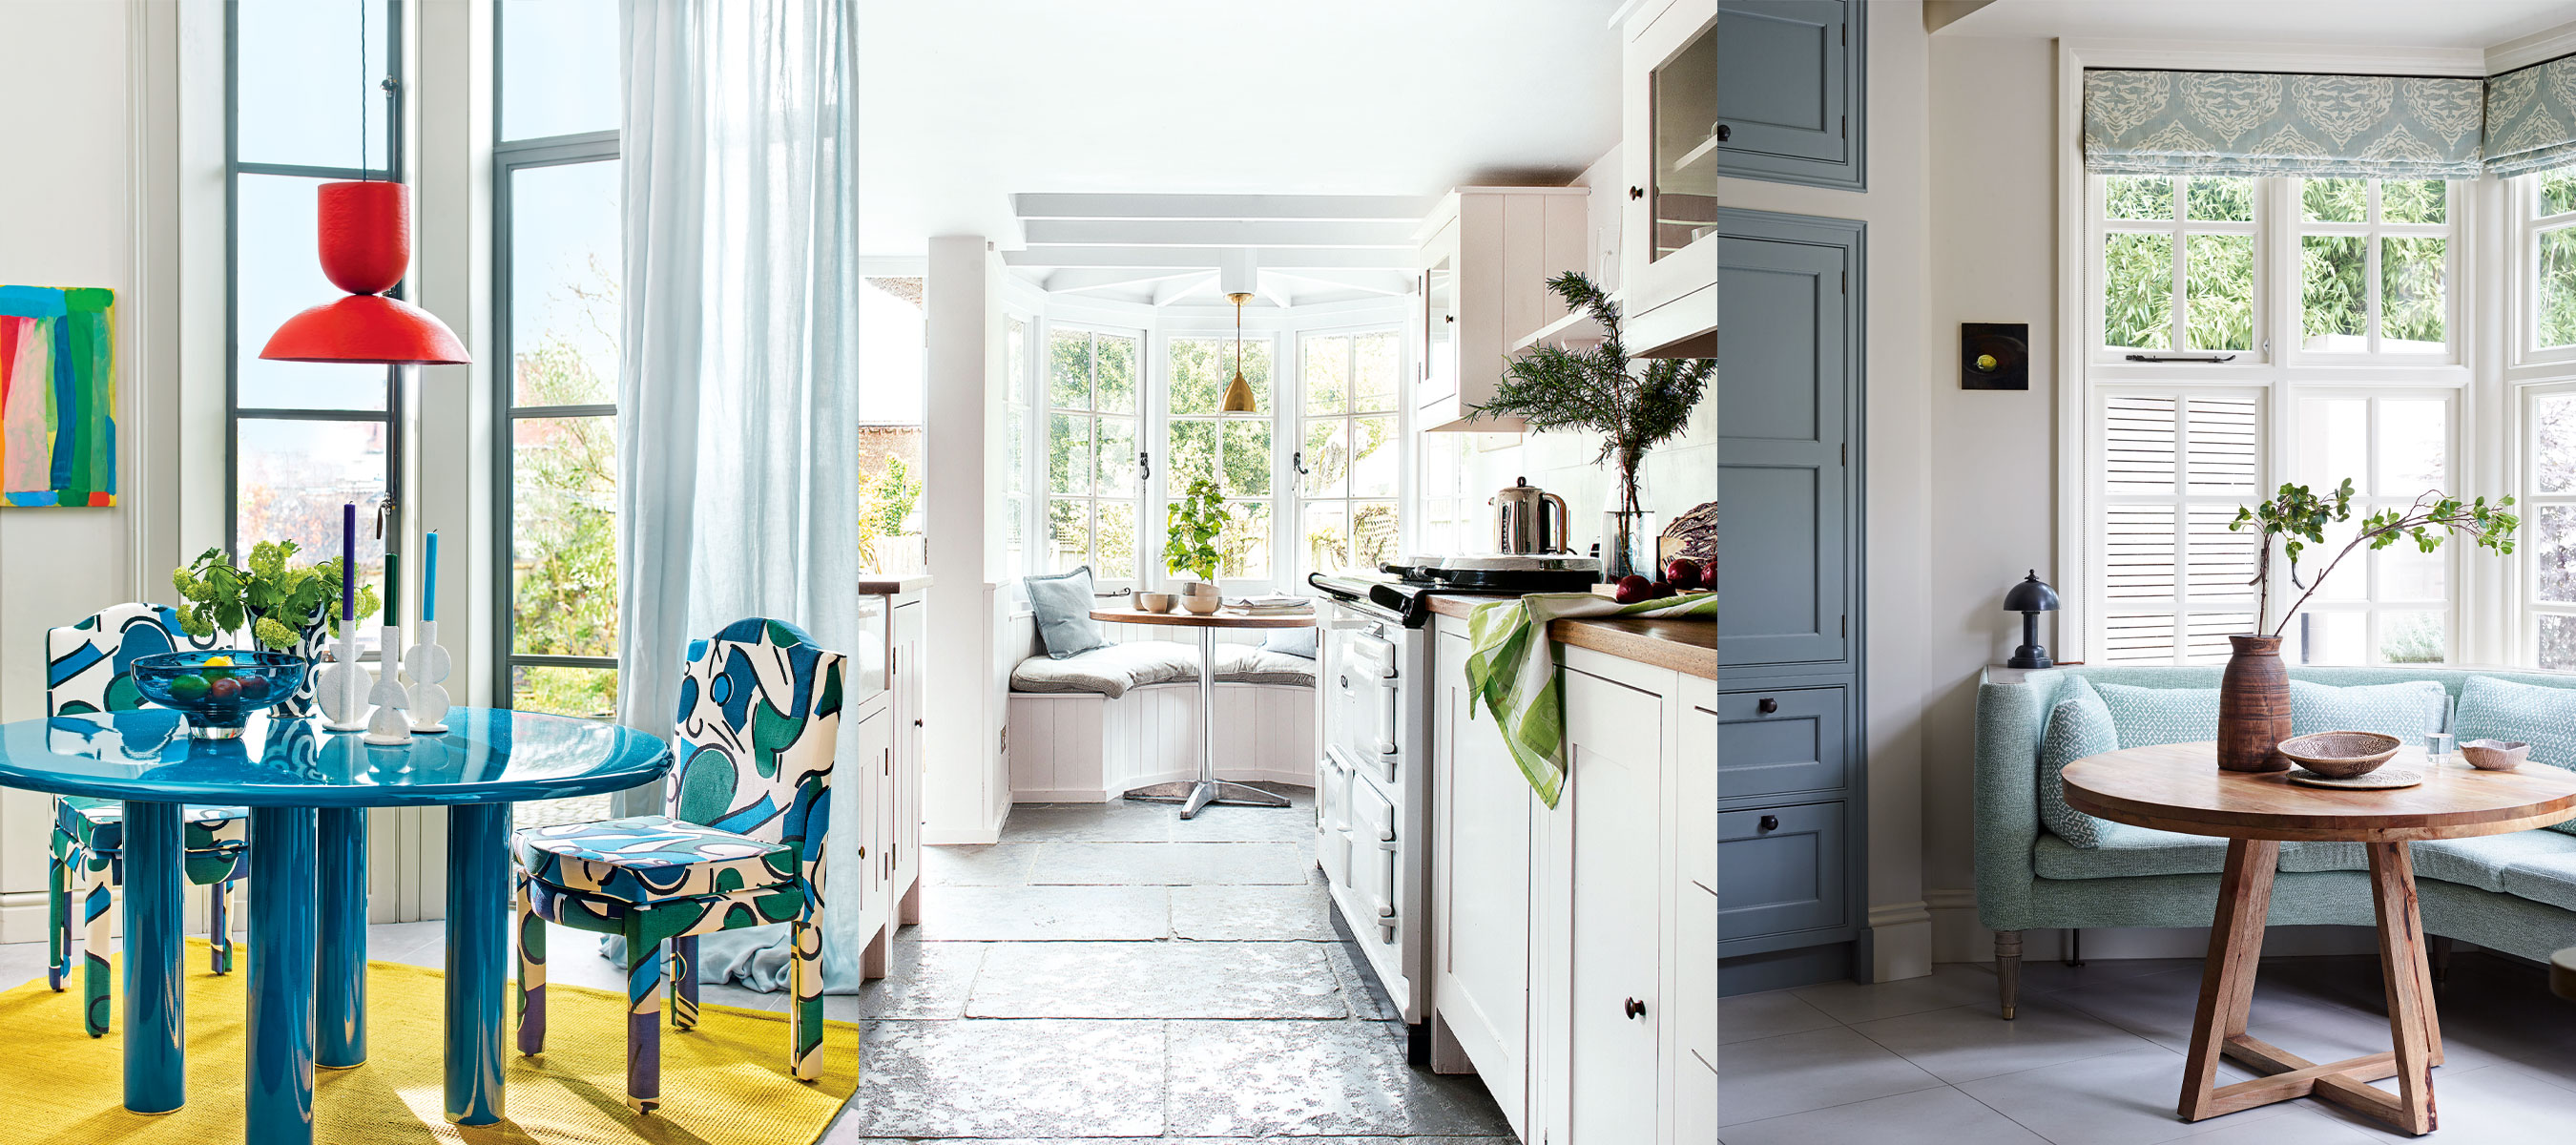 Sit Back and Relax With Our Small Kitchen Banquette Seating Ideas